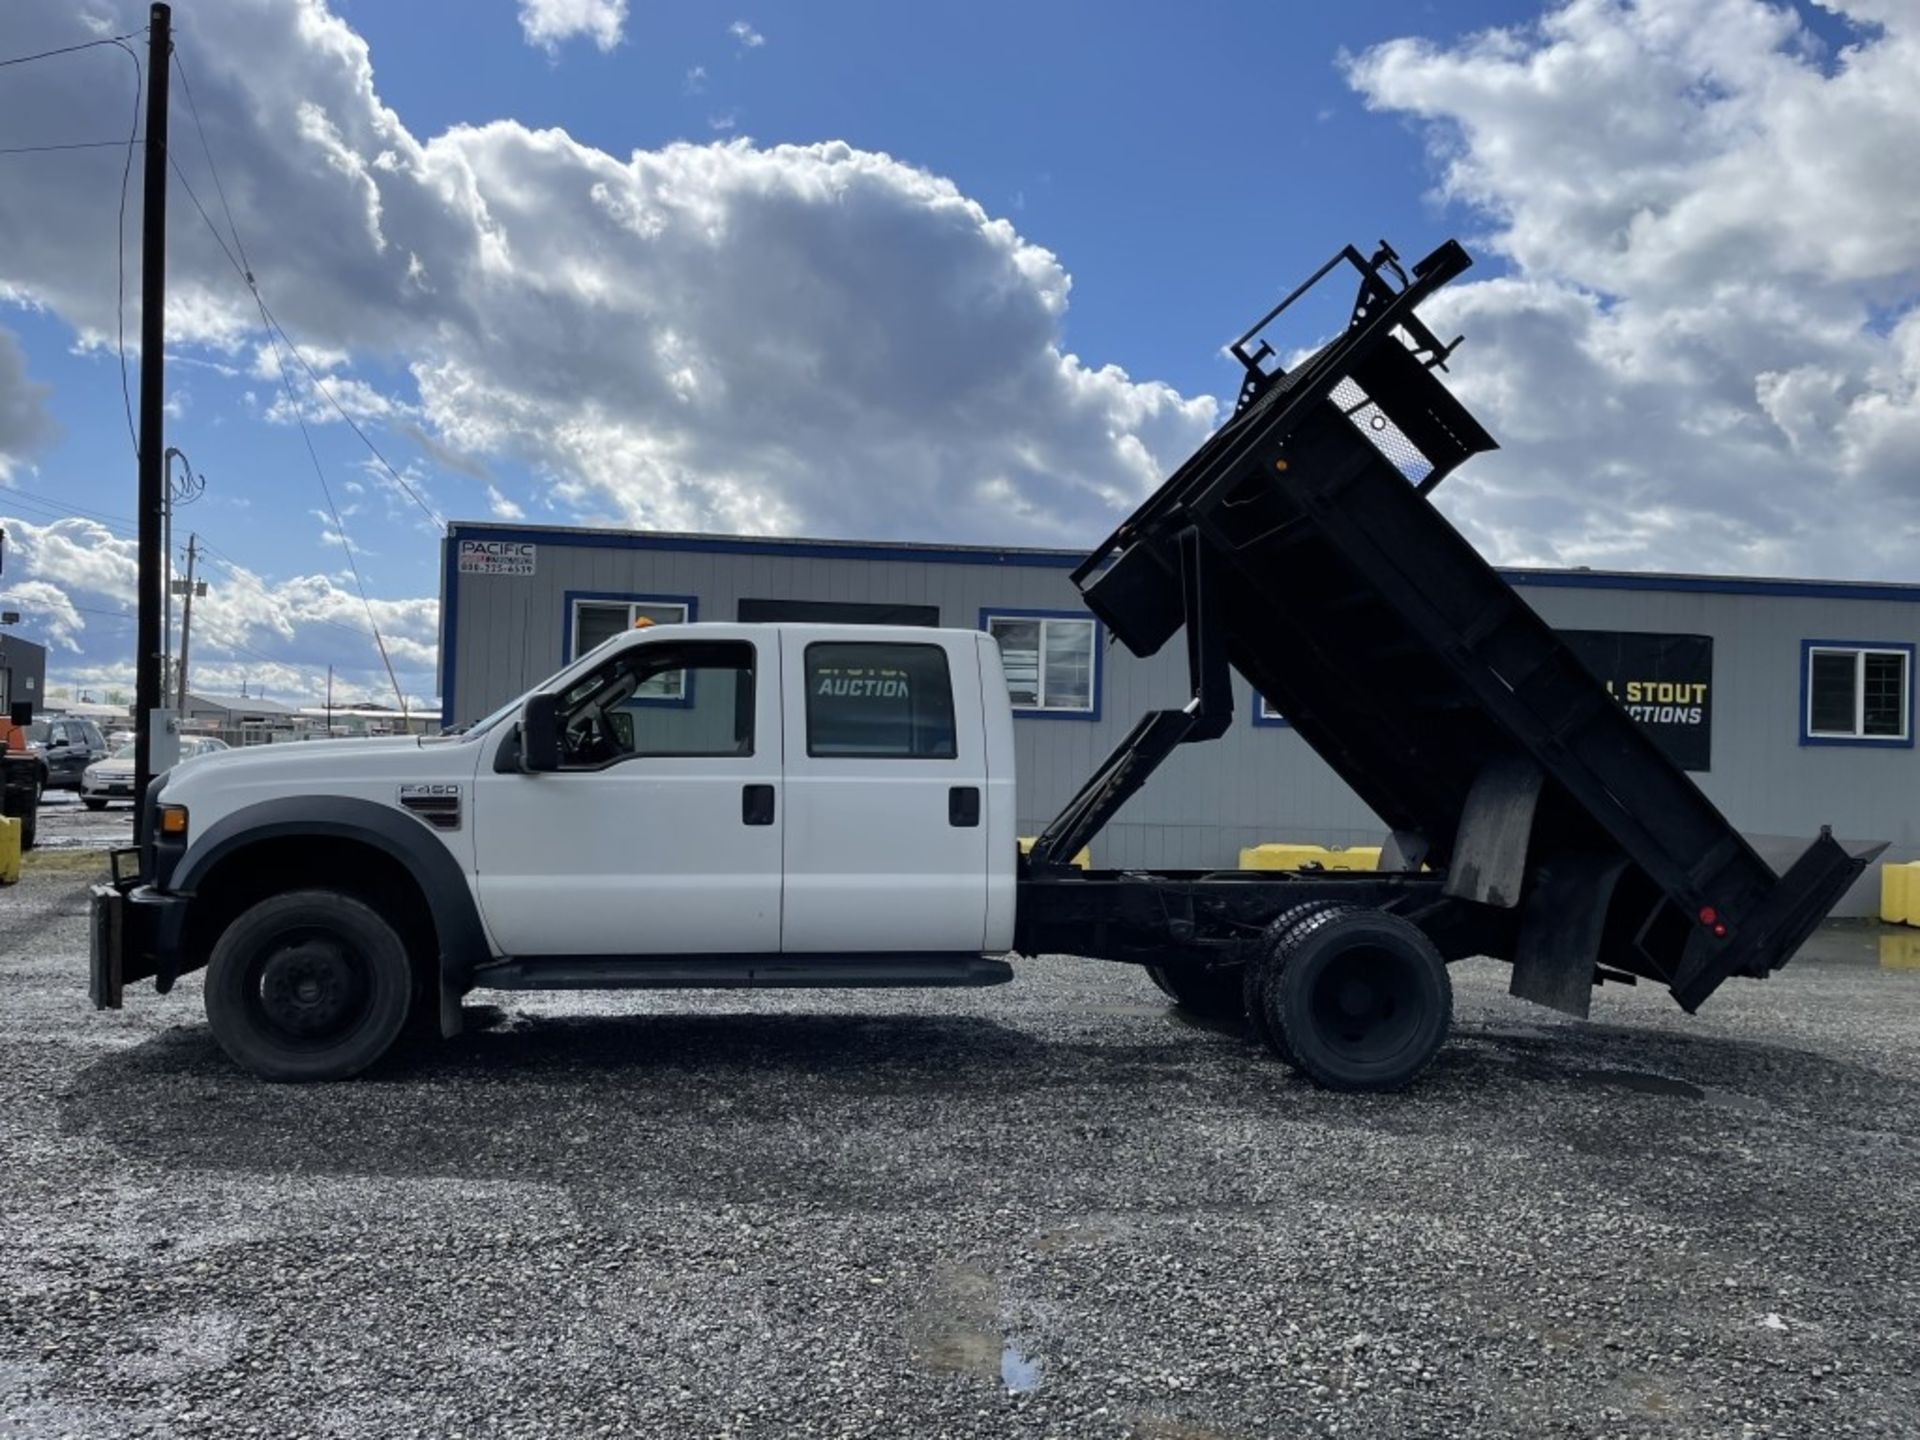 2010 Ford F450 XL 4x4 Crew Cab Flatbed Dump Truck - Image 9 of 36